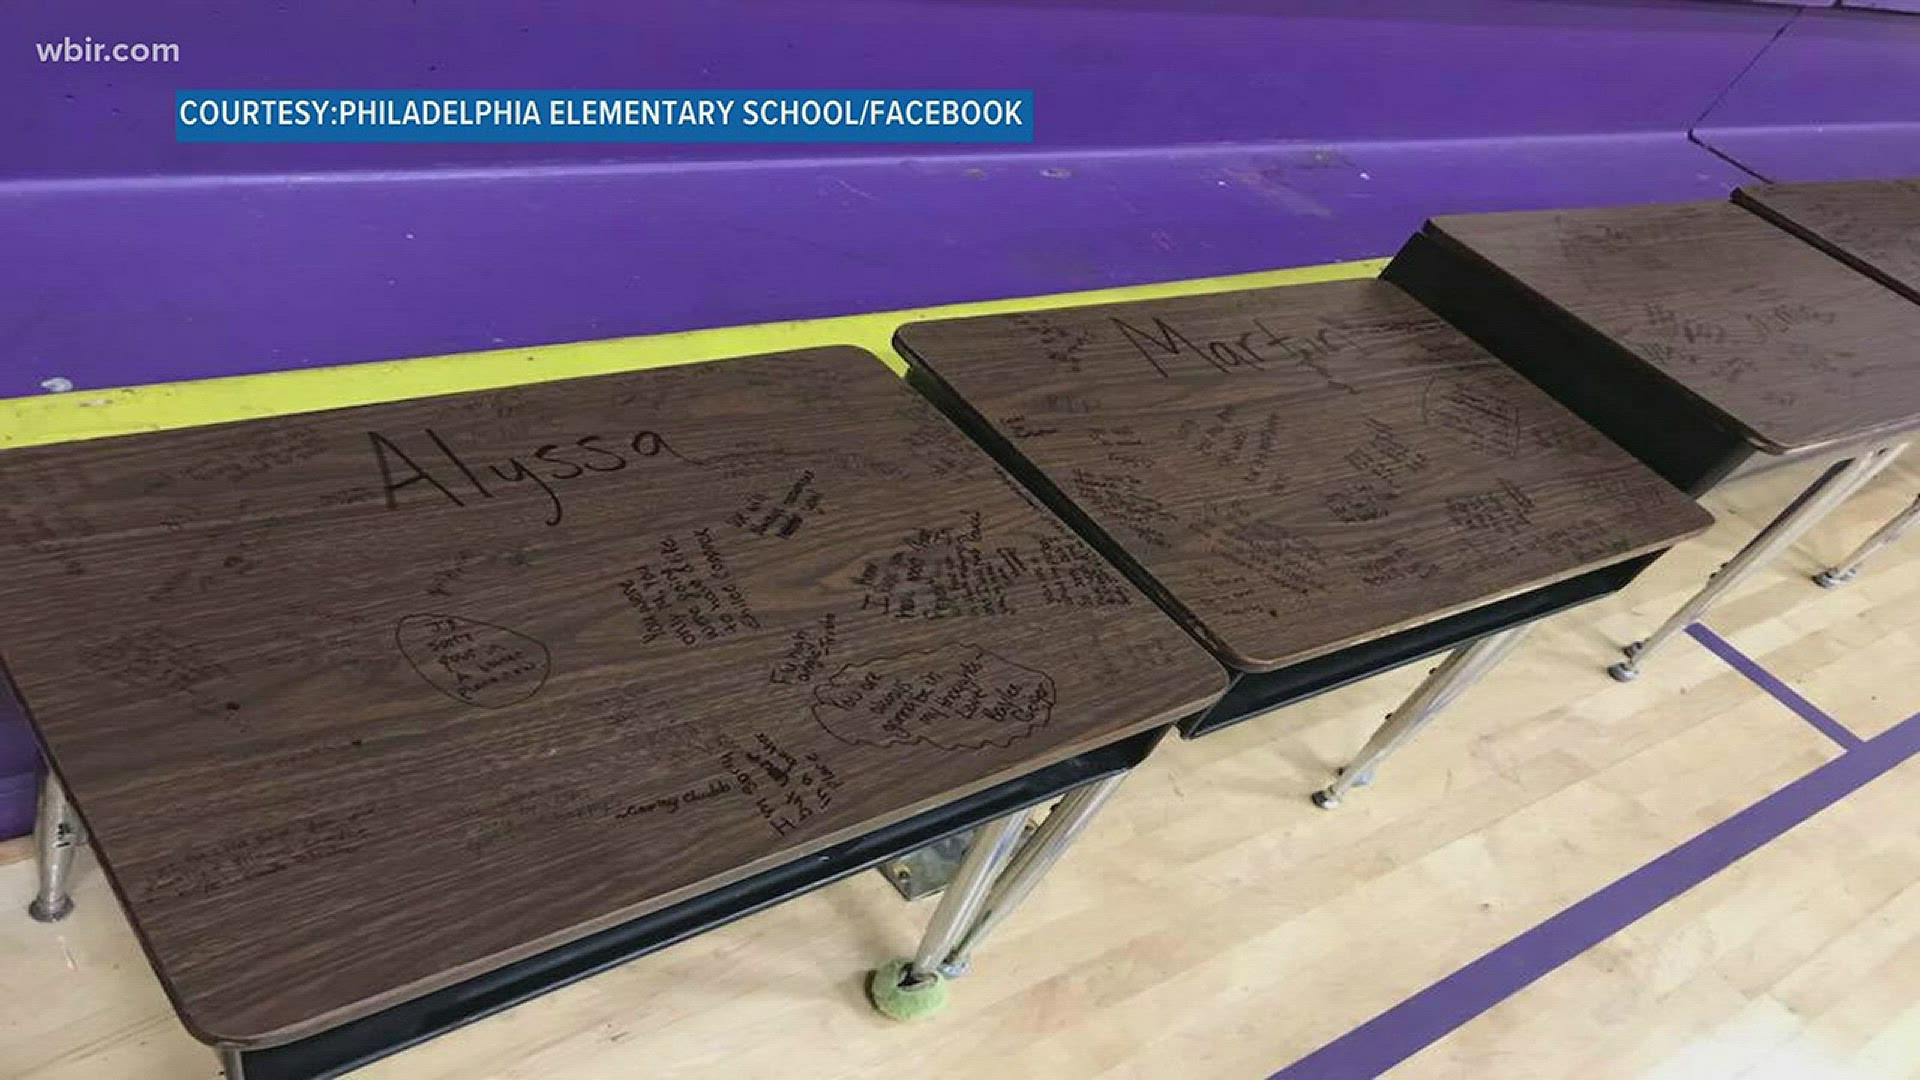 Students at Philadelphia Elementary School took 17 empty desks and wrote messages to the 17 who died in the Parkland, Fla. high school shooting in February.